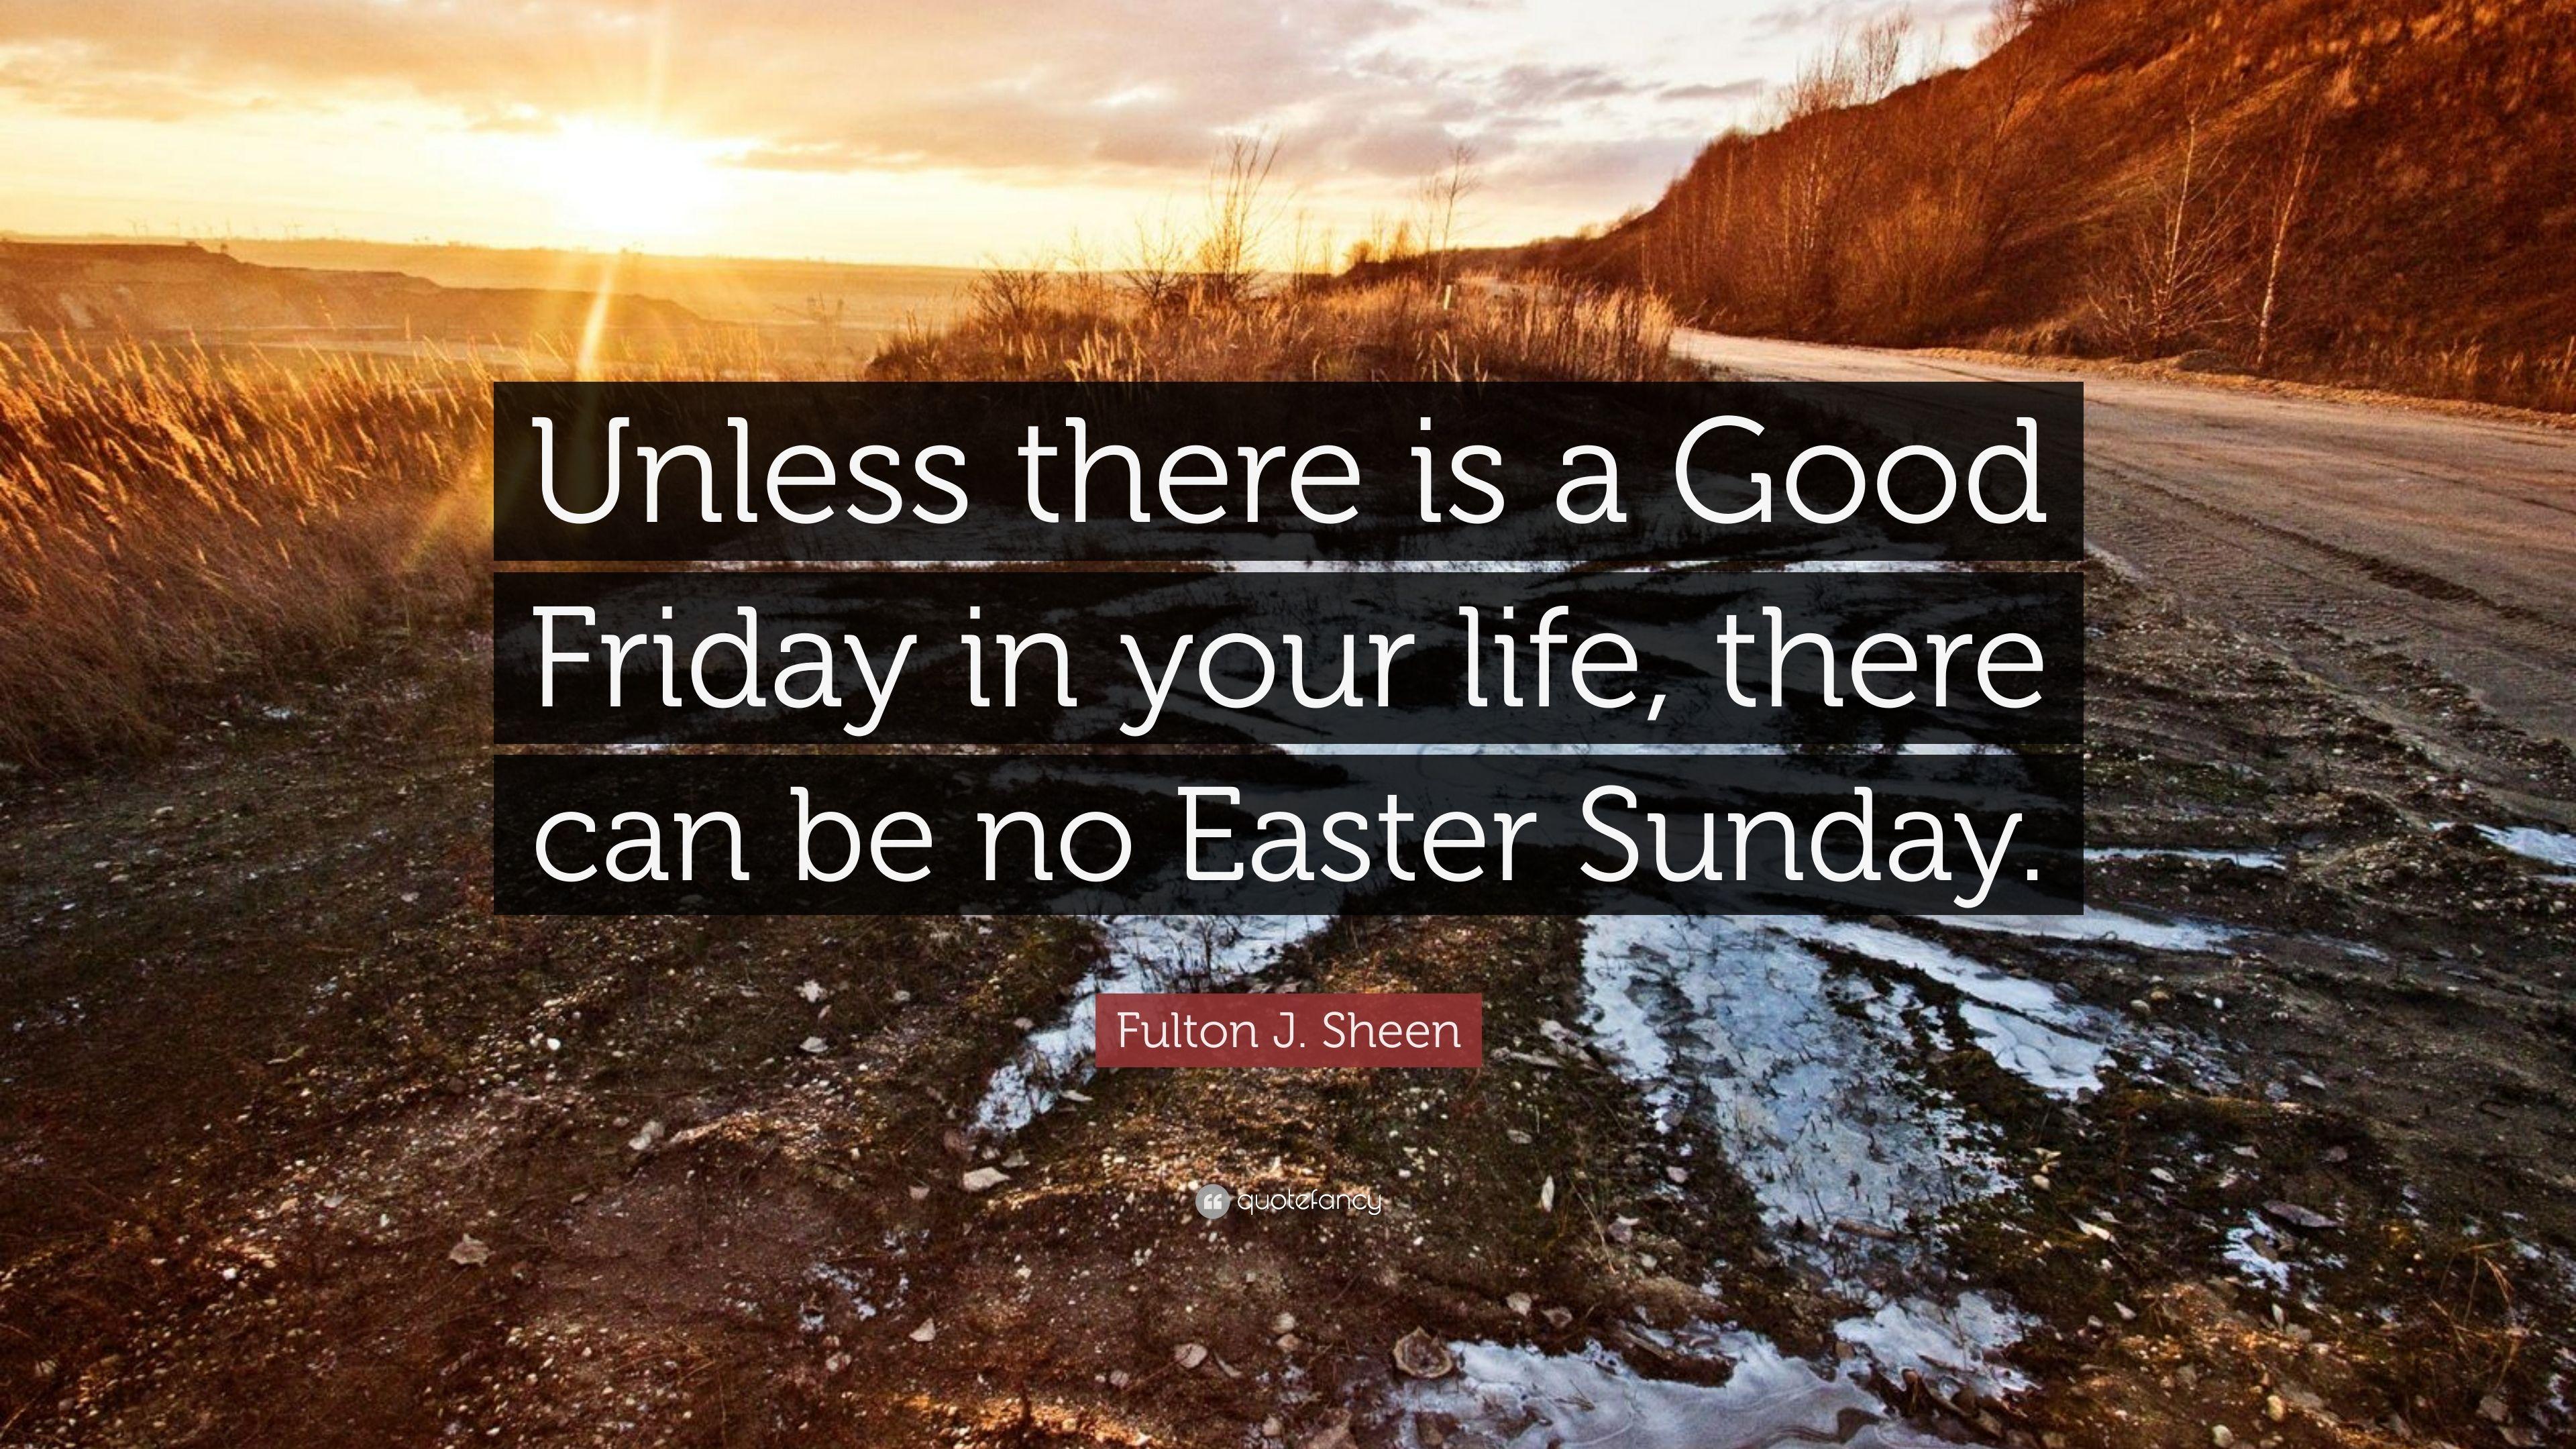 3840x2160 Fulton J. Sheen Quote: “Unless there is a Good Friday in your life